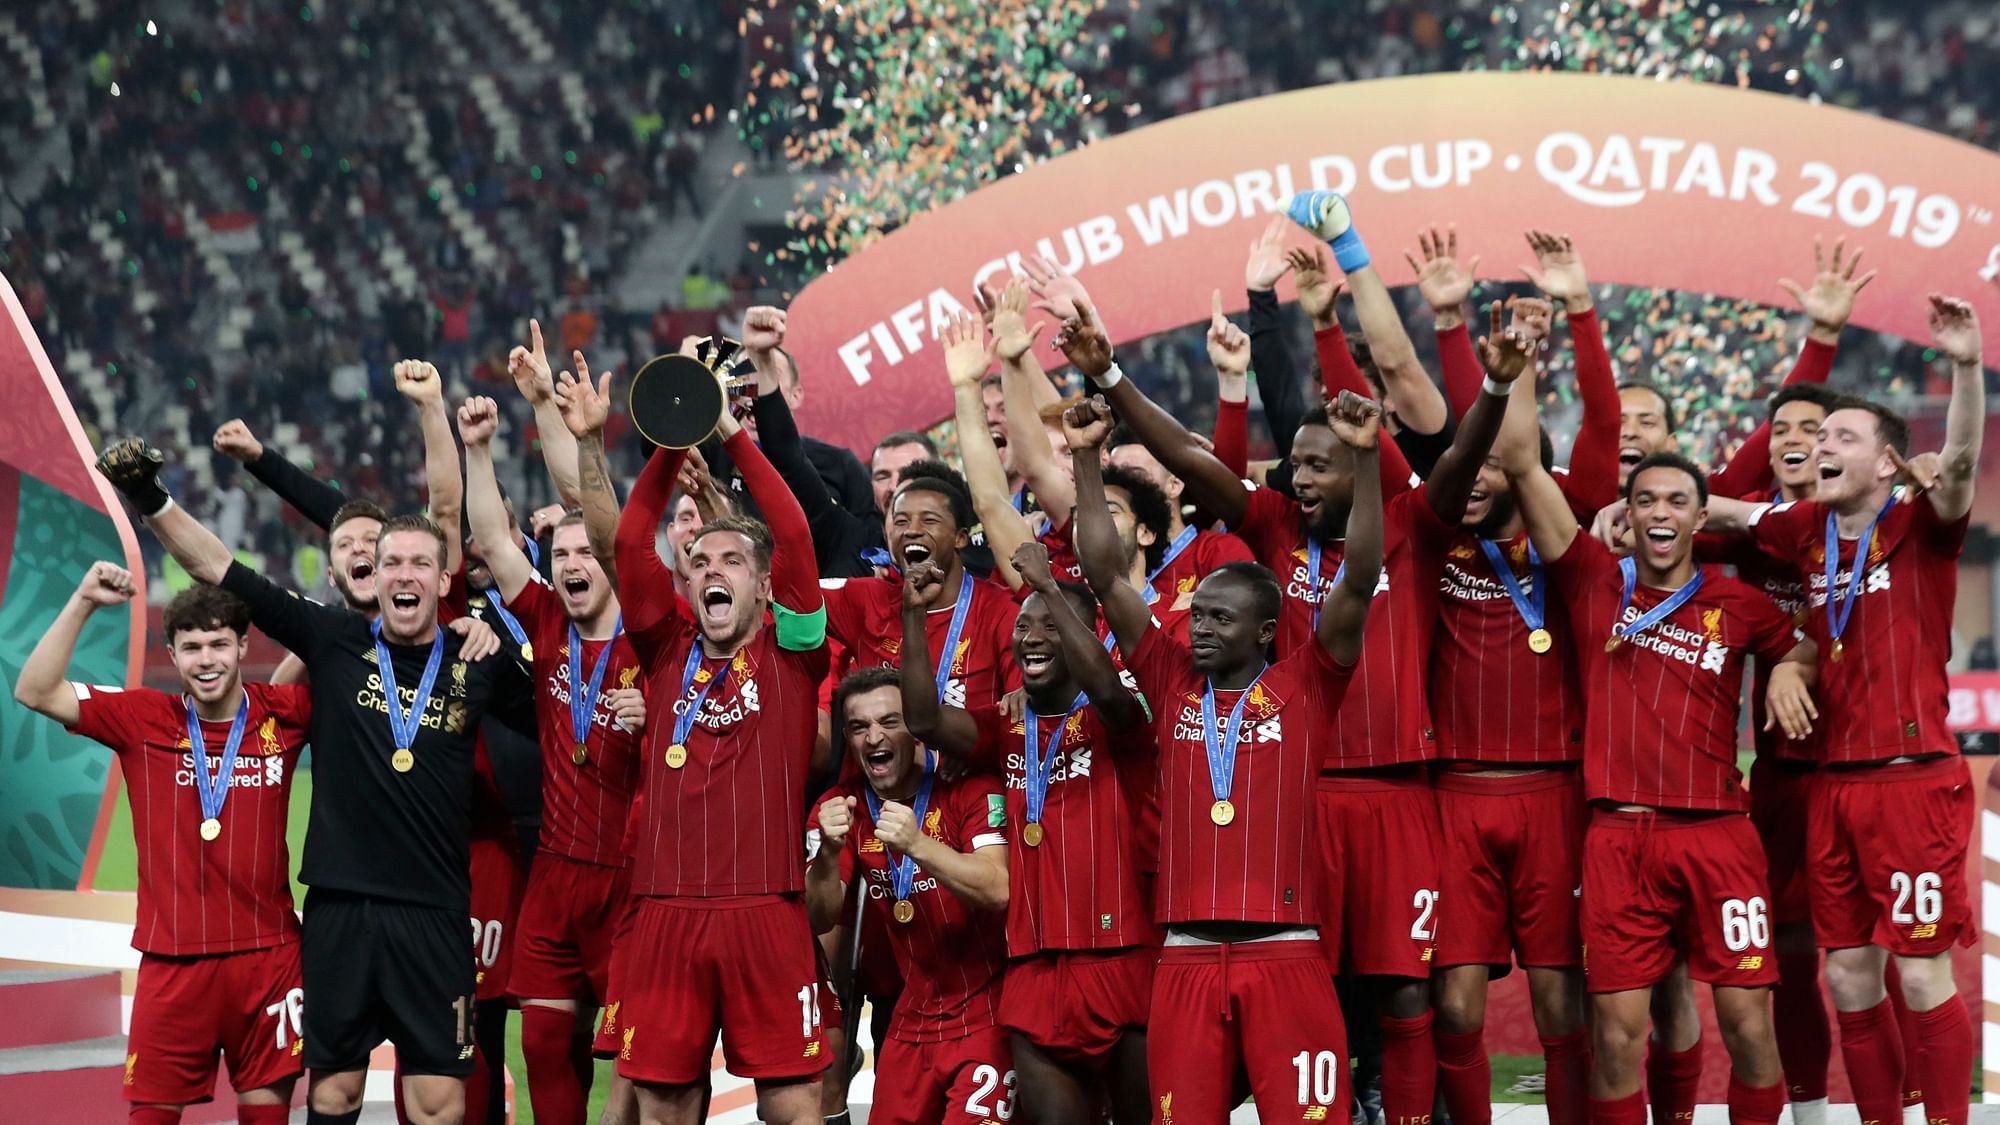 Liverpool became the second English side to win the tournament, after Manchester United in 2008.